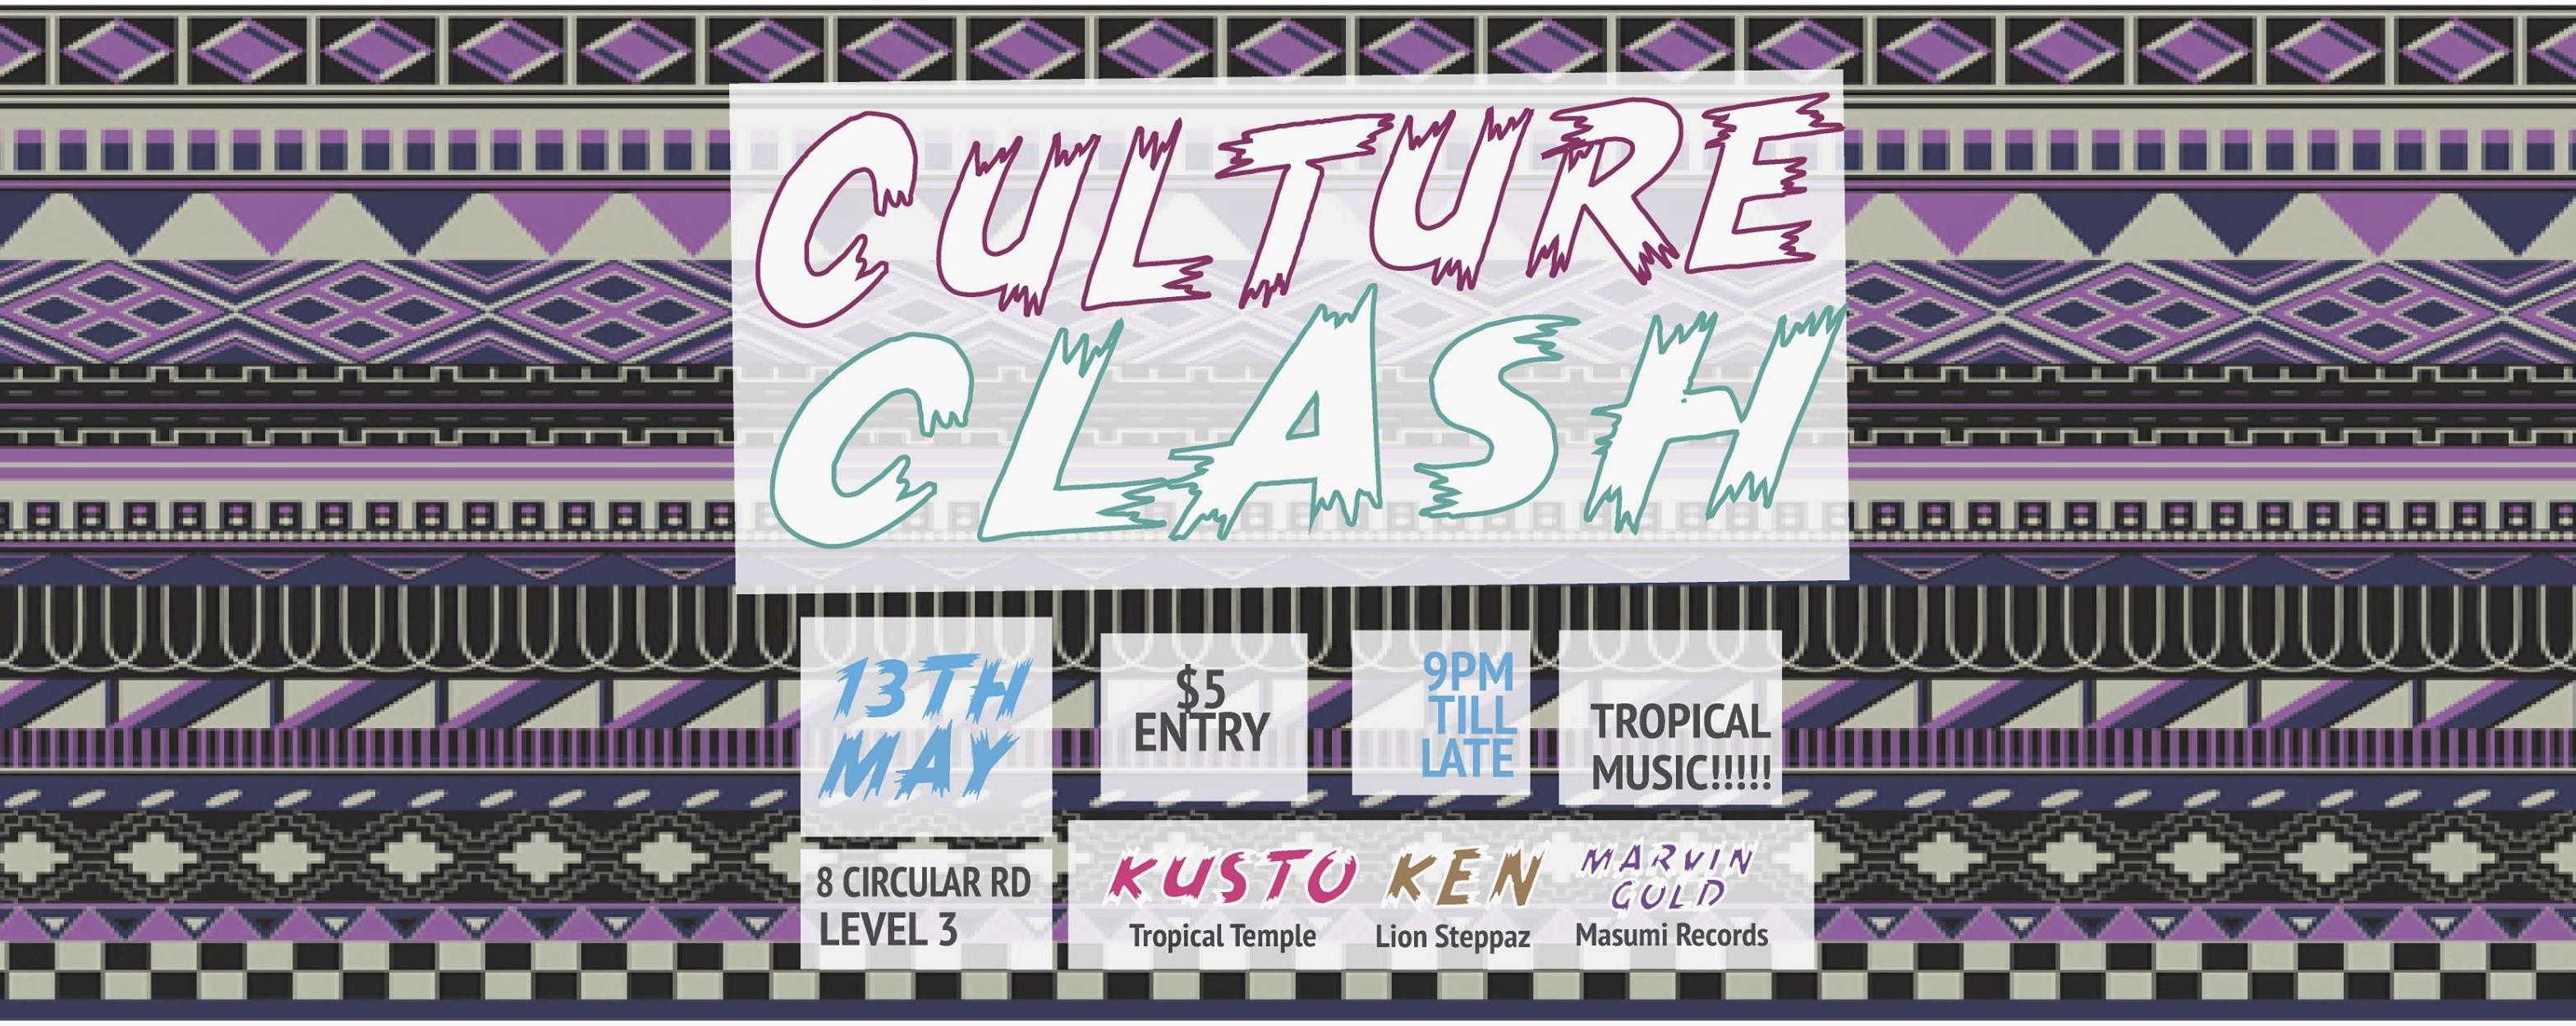 Culture Clash with Kusto and Ken